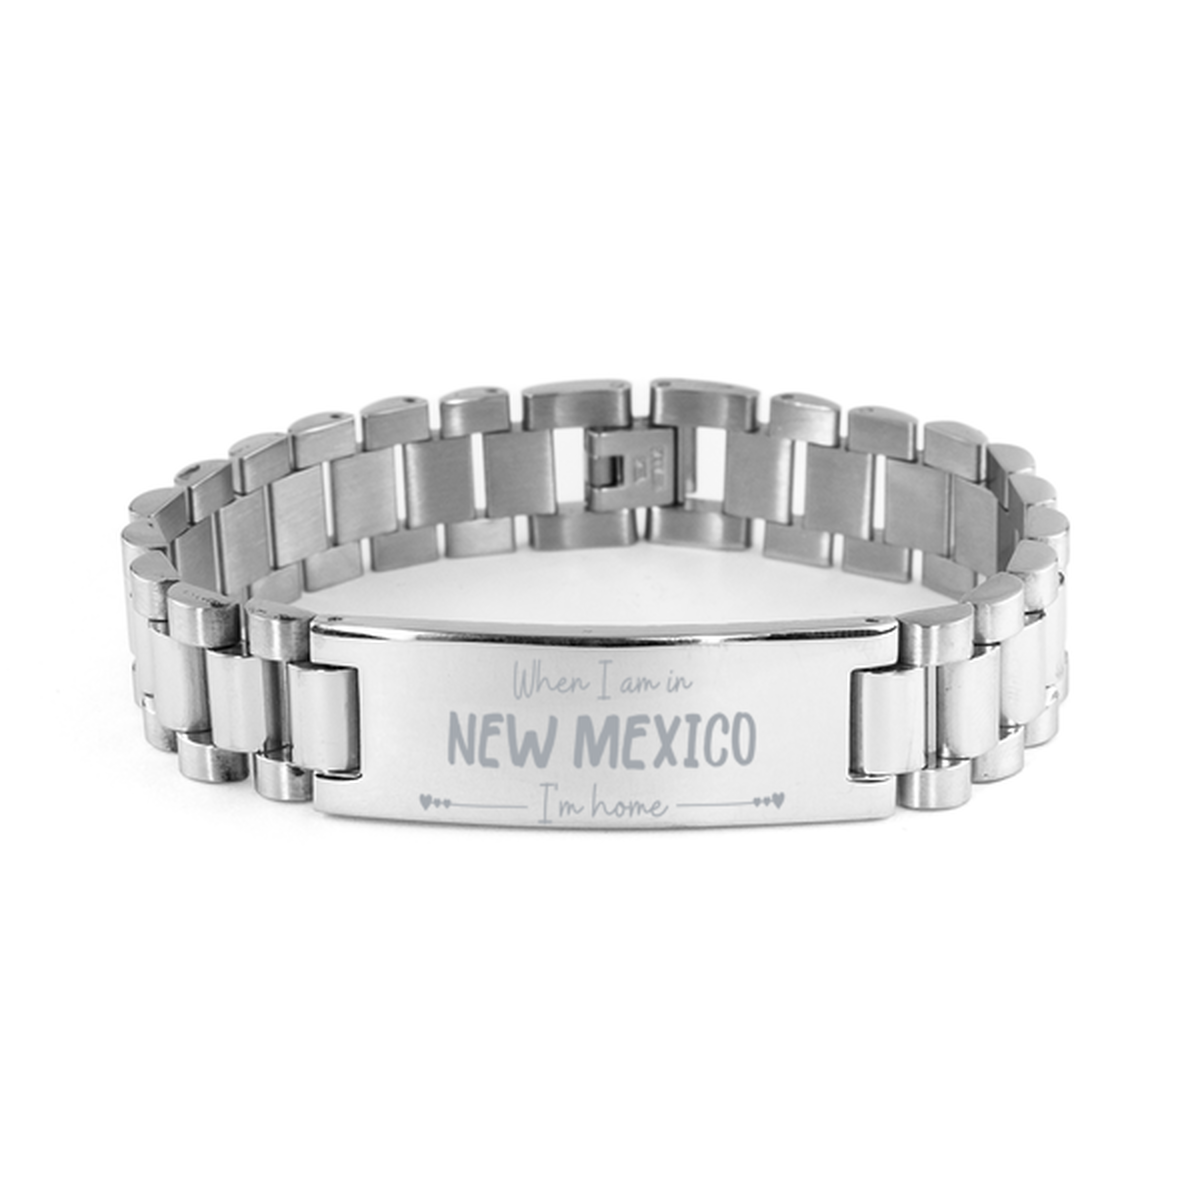 When I am in New Mexico I'm home Ladder Stainless Steel Bracelet, Cheap Gifts For New Mexico, State New Mexico Birthday Gifts for Friends Coworker